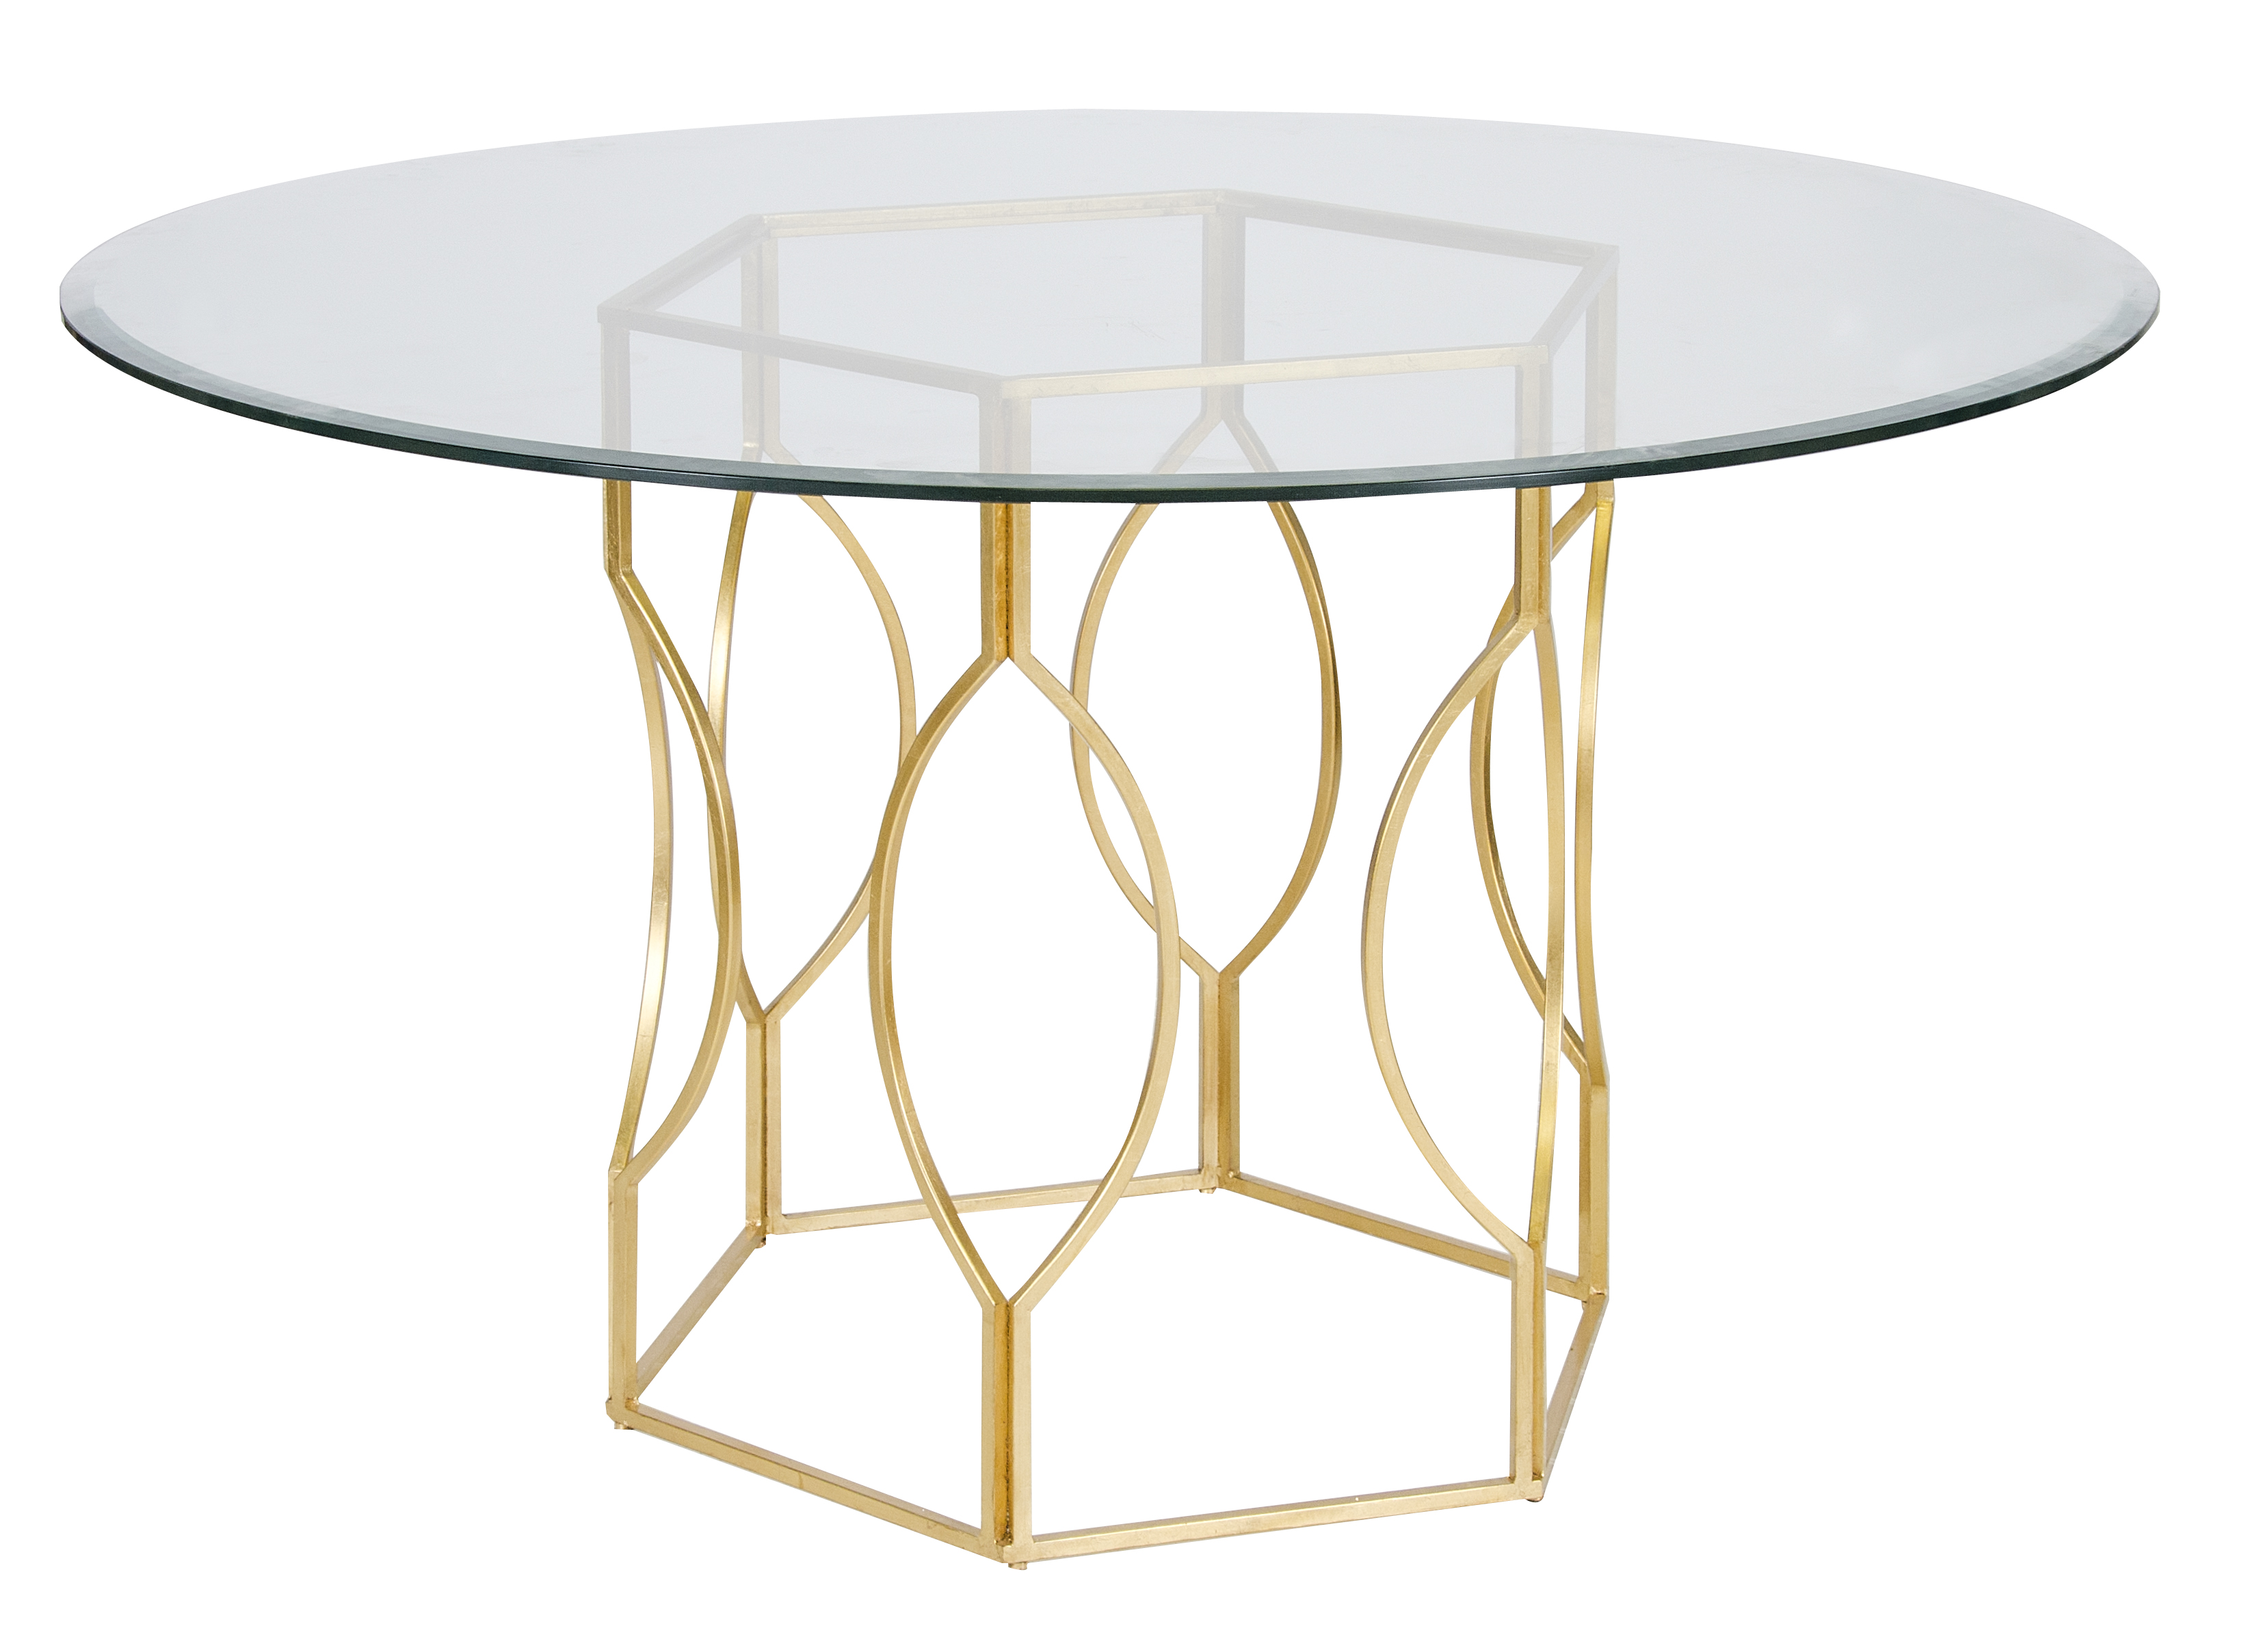 Worlds Away Abigail dining table